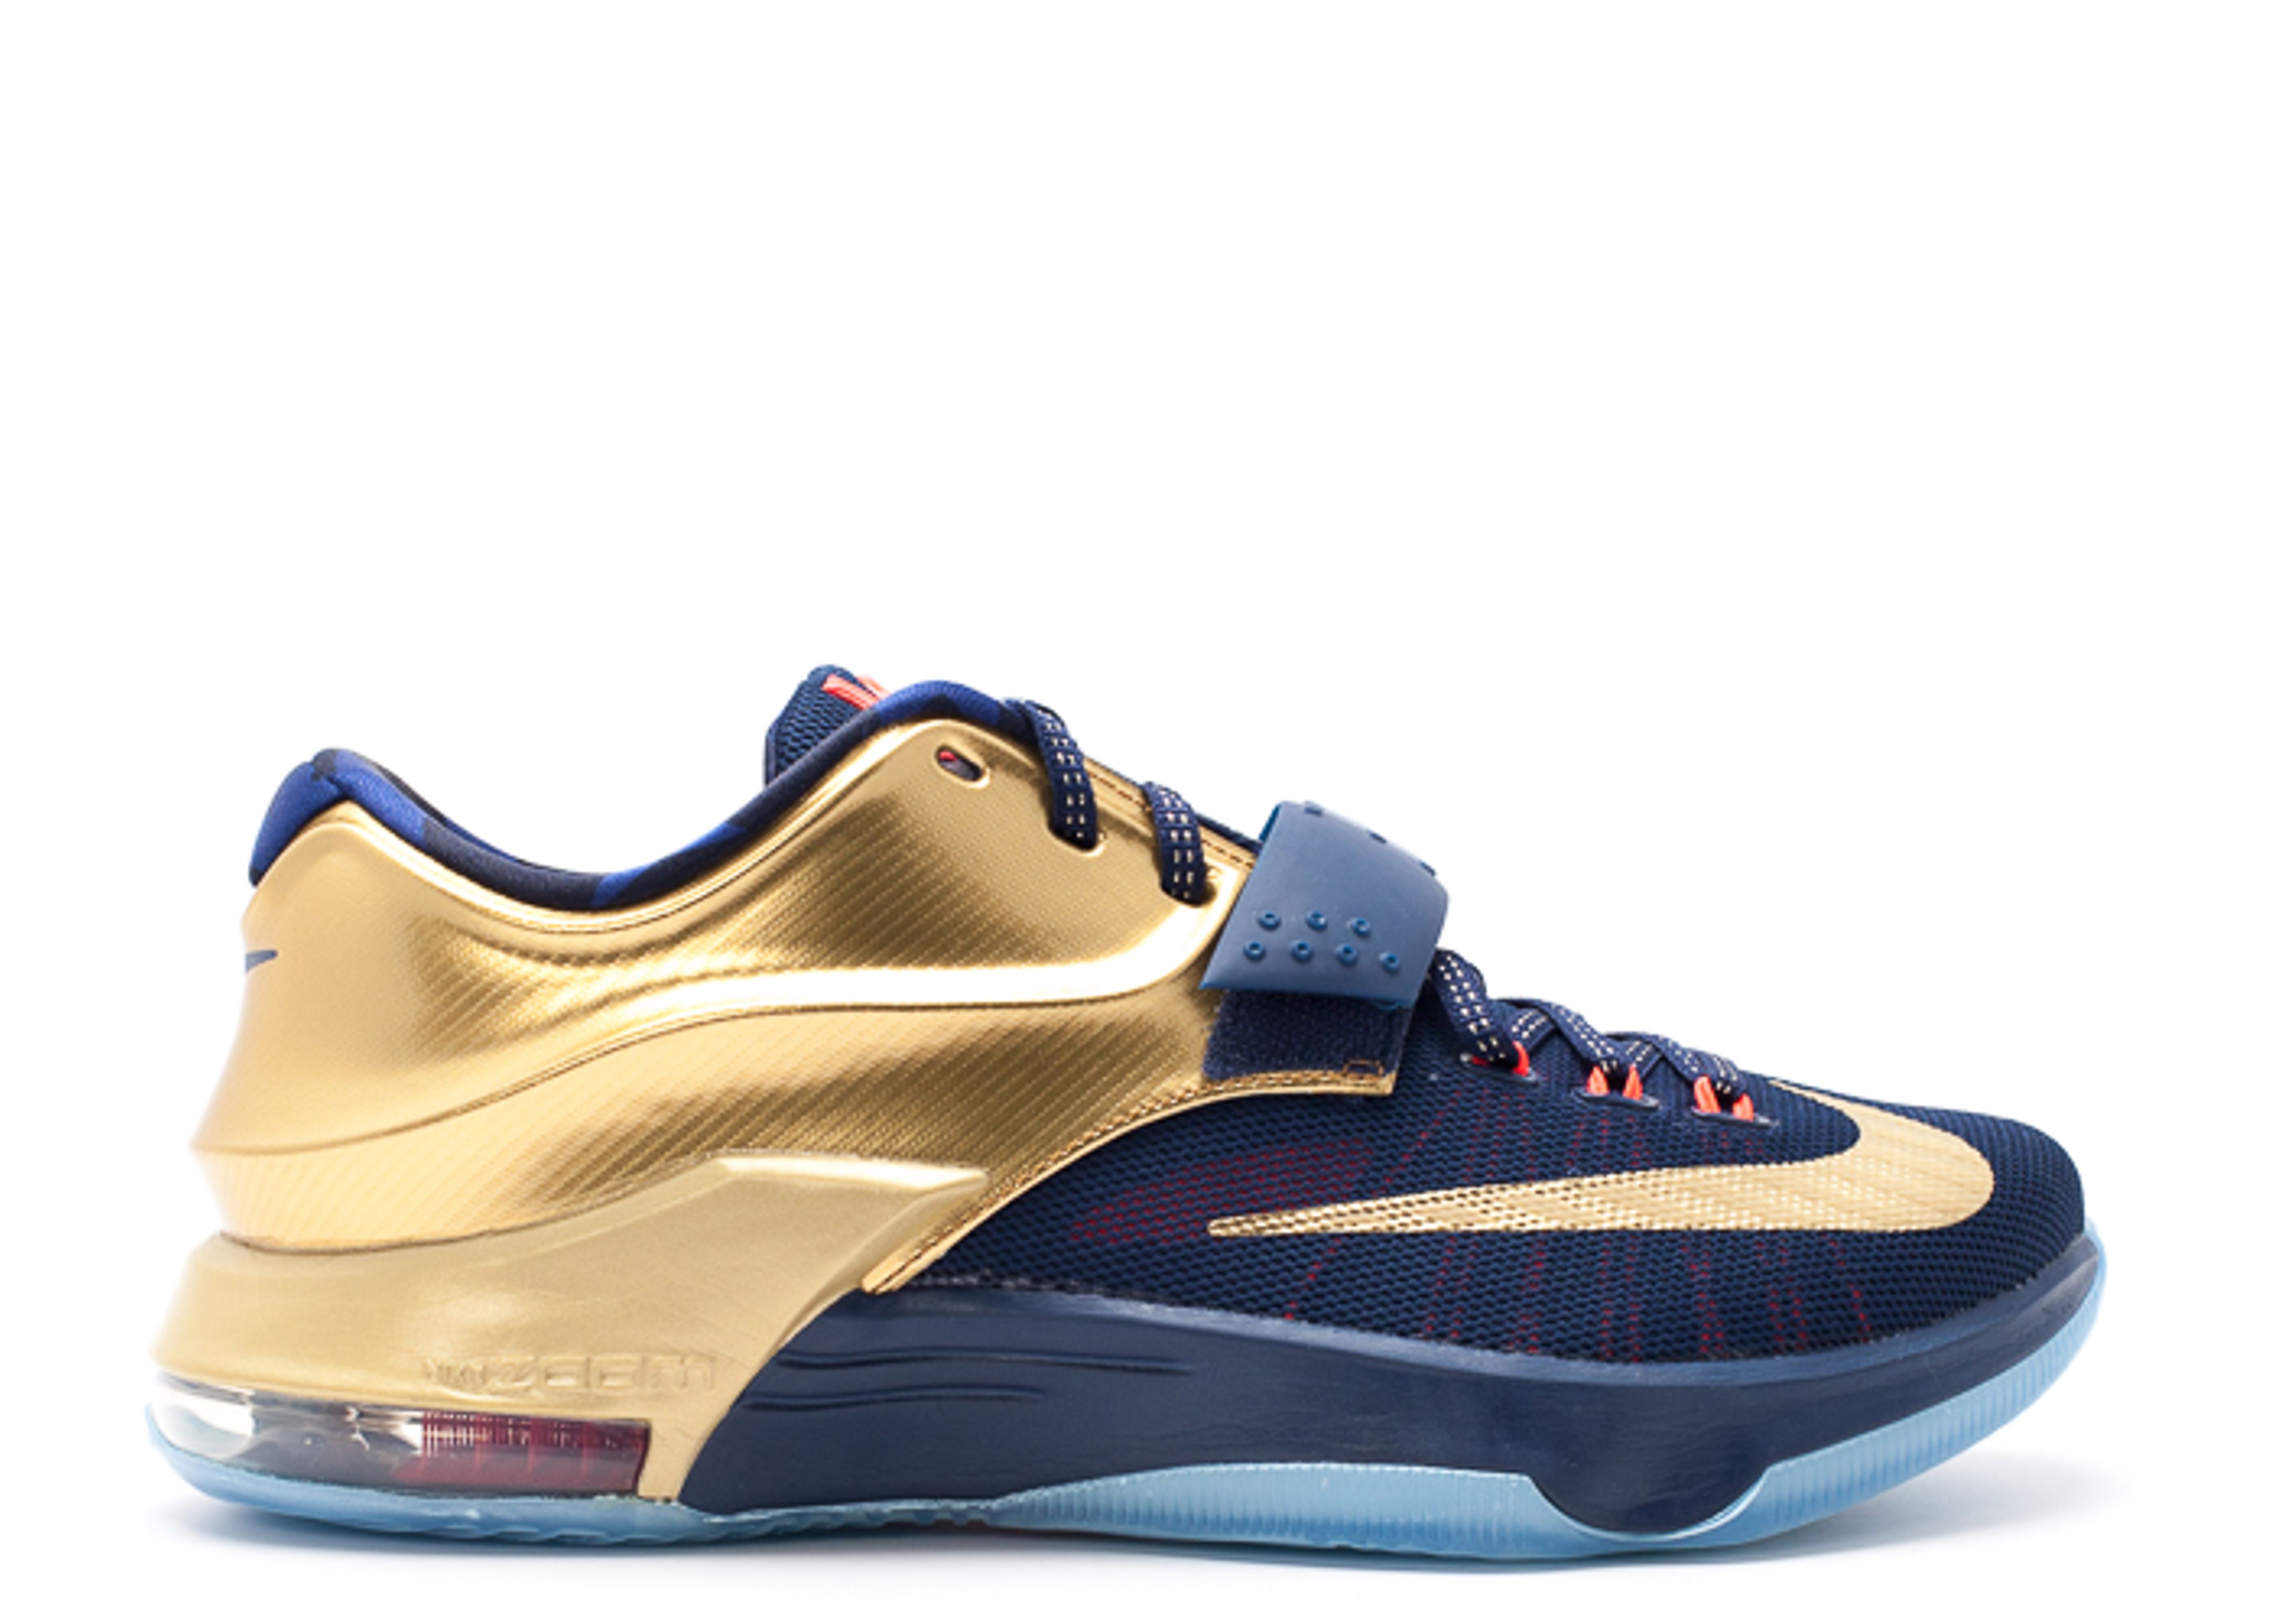 kd 7 black and gold